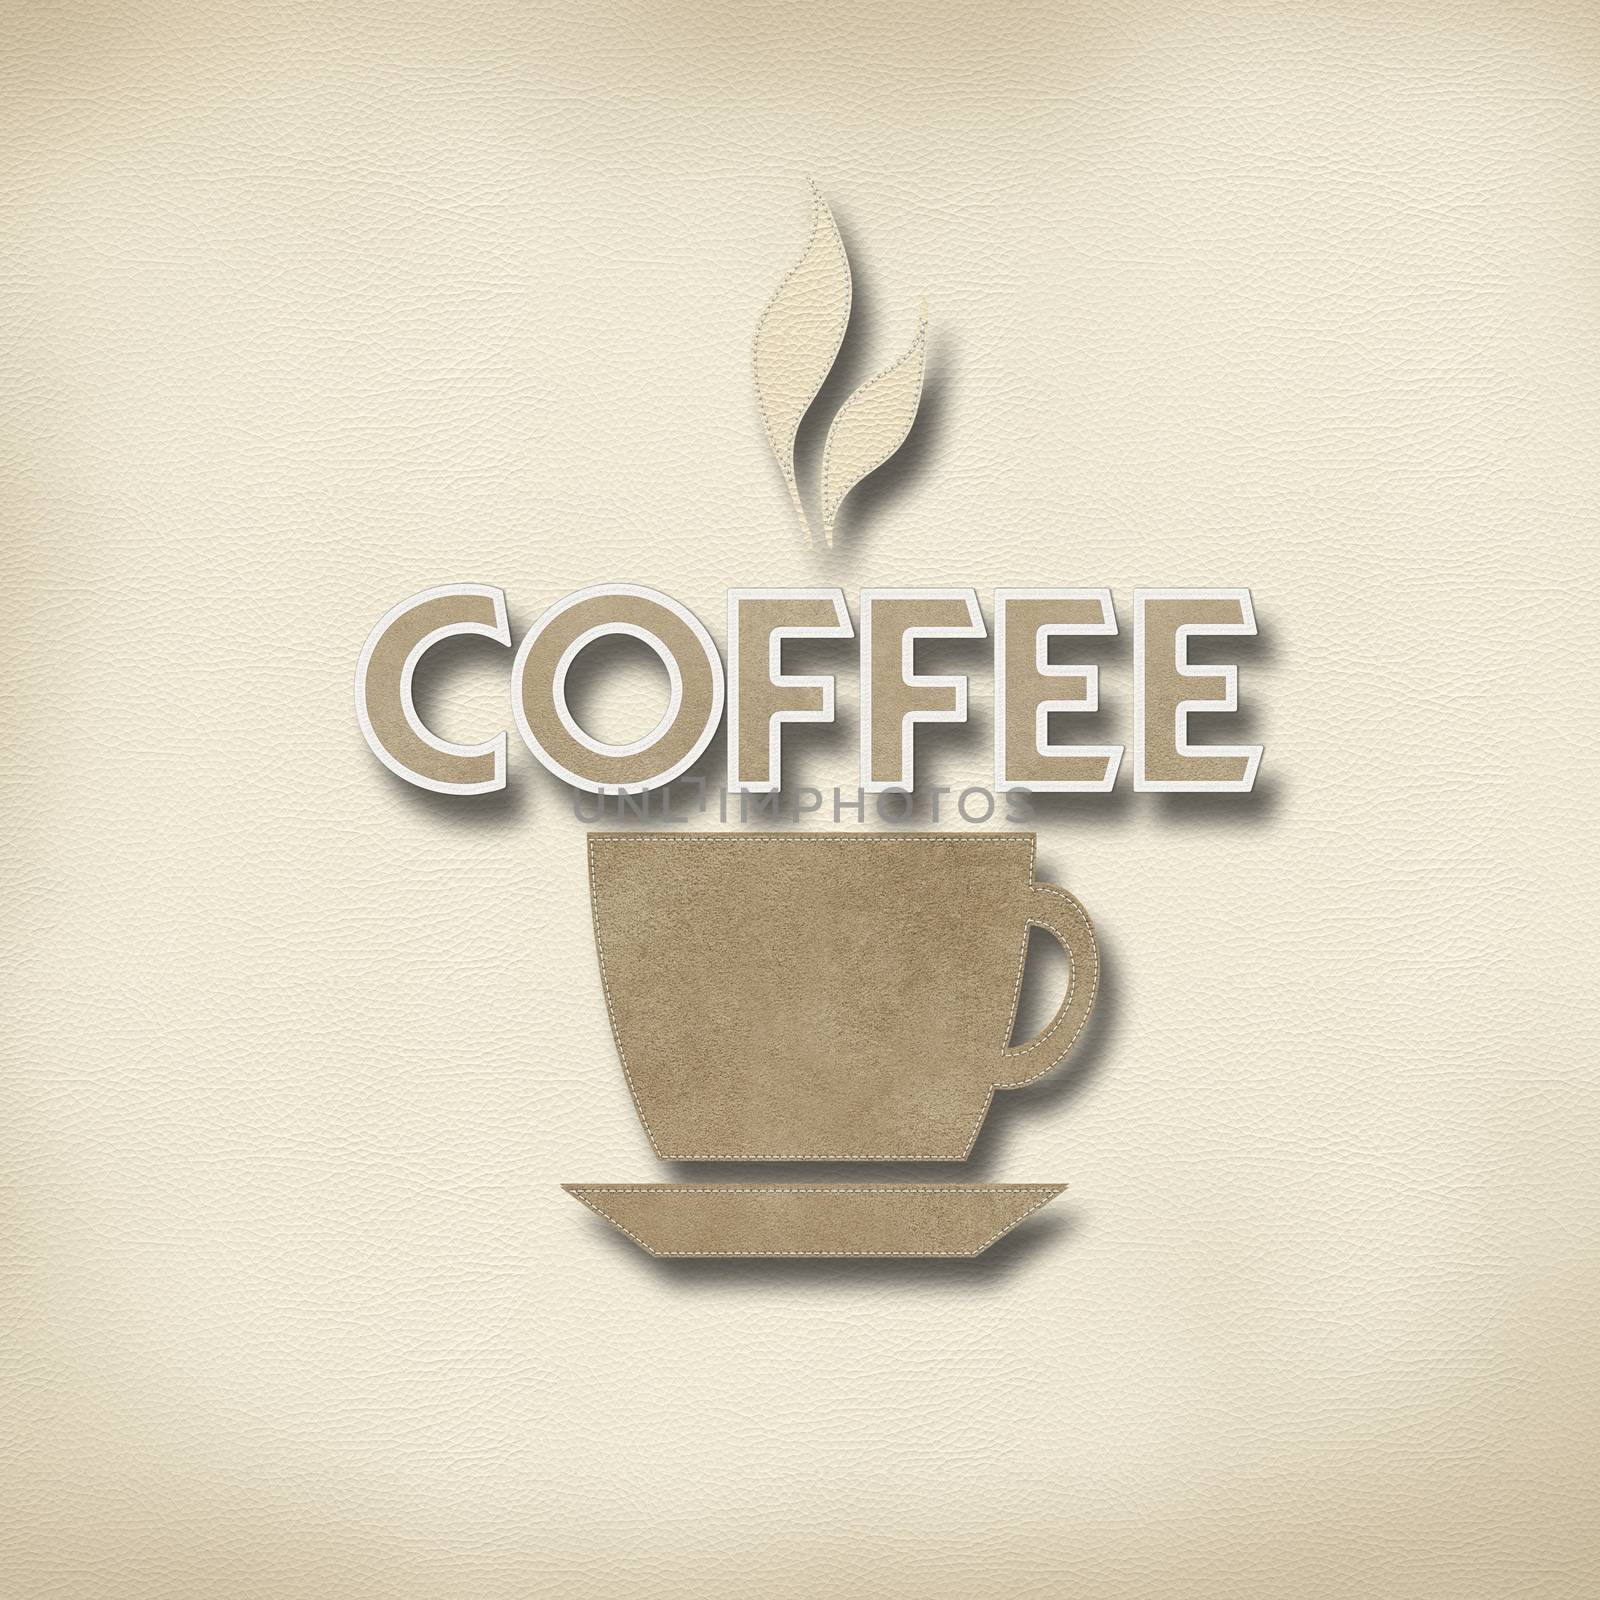 Coffee with stitch style on leather background